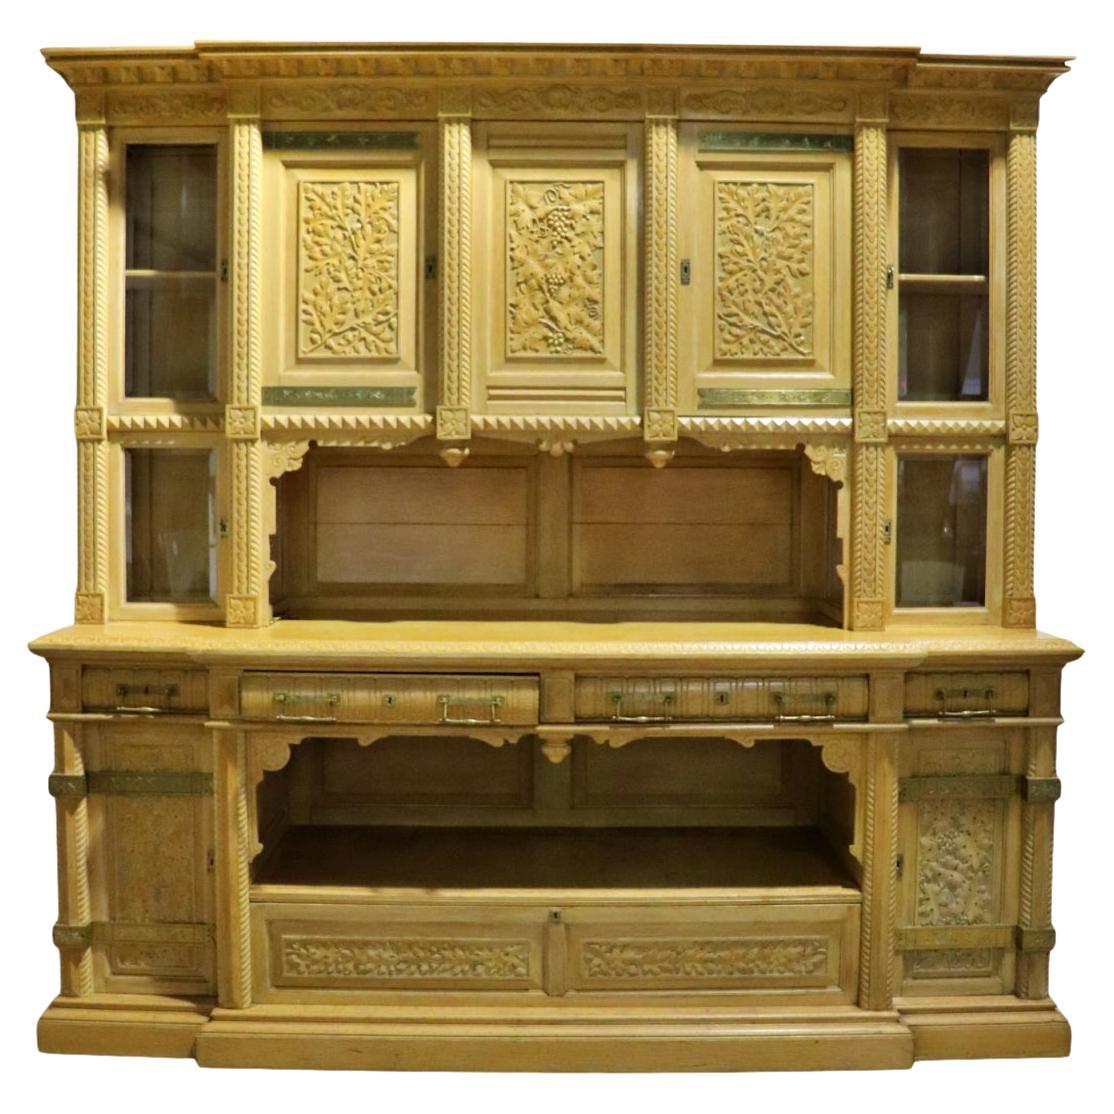 Rare Golden Oak Herter Brothers Attributed Court Cabinet or Cupboard circa 1880 For Sale